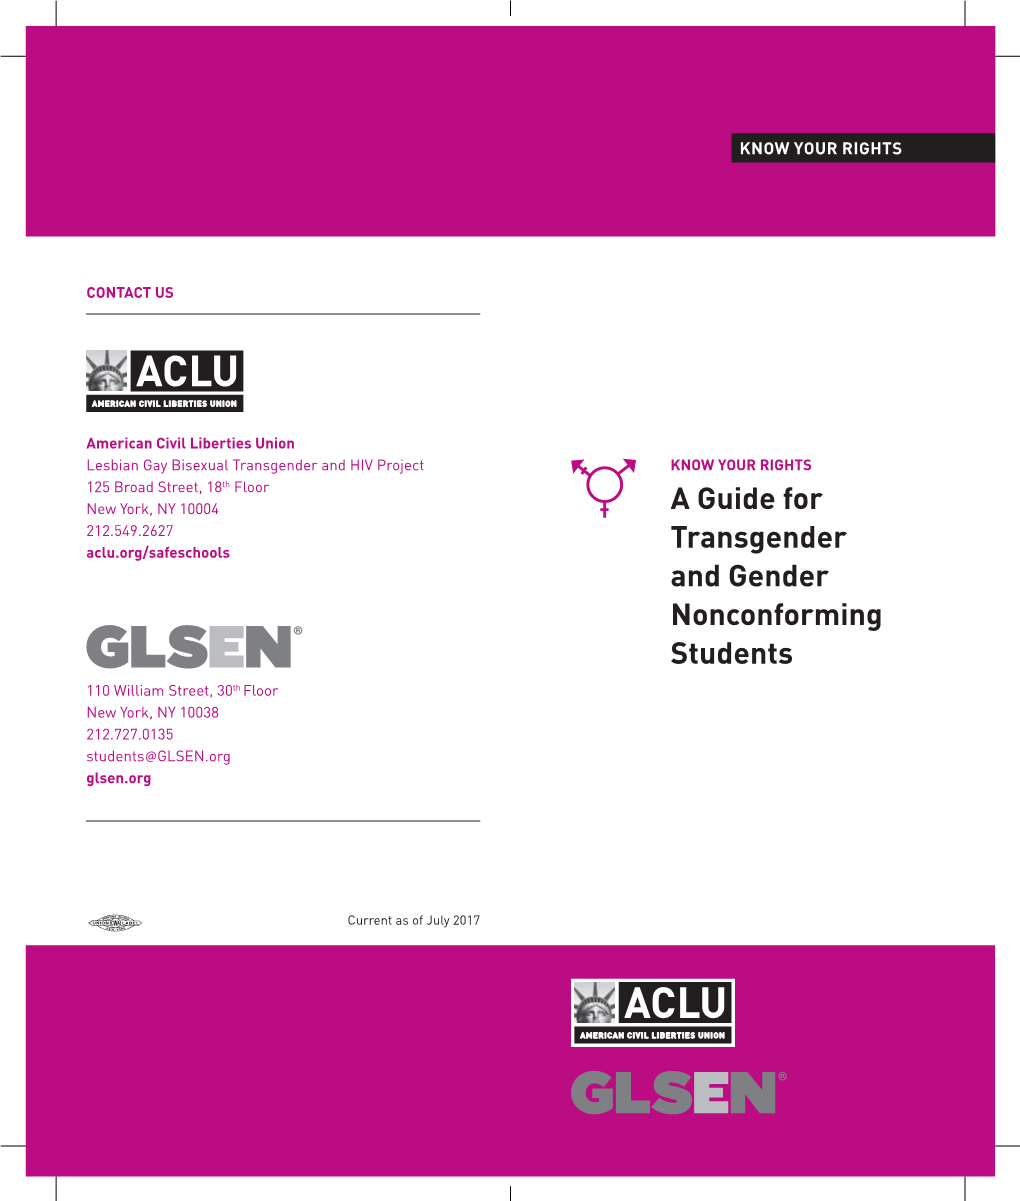 A Guide for Transgender and Gender Nonconforming Students